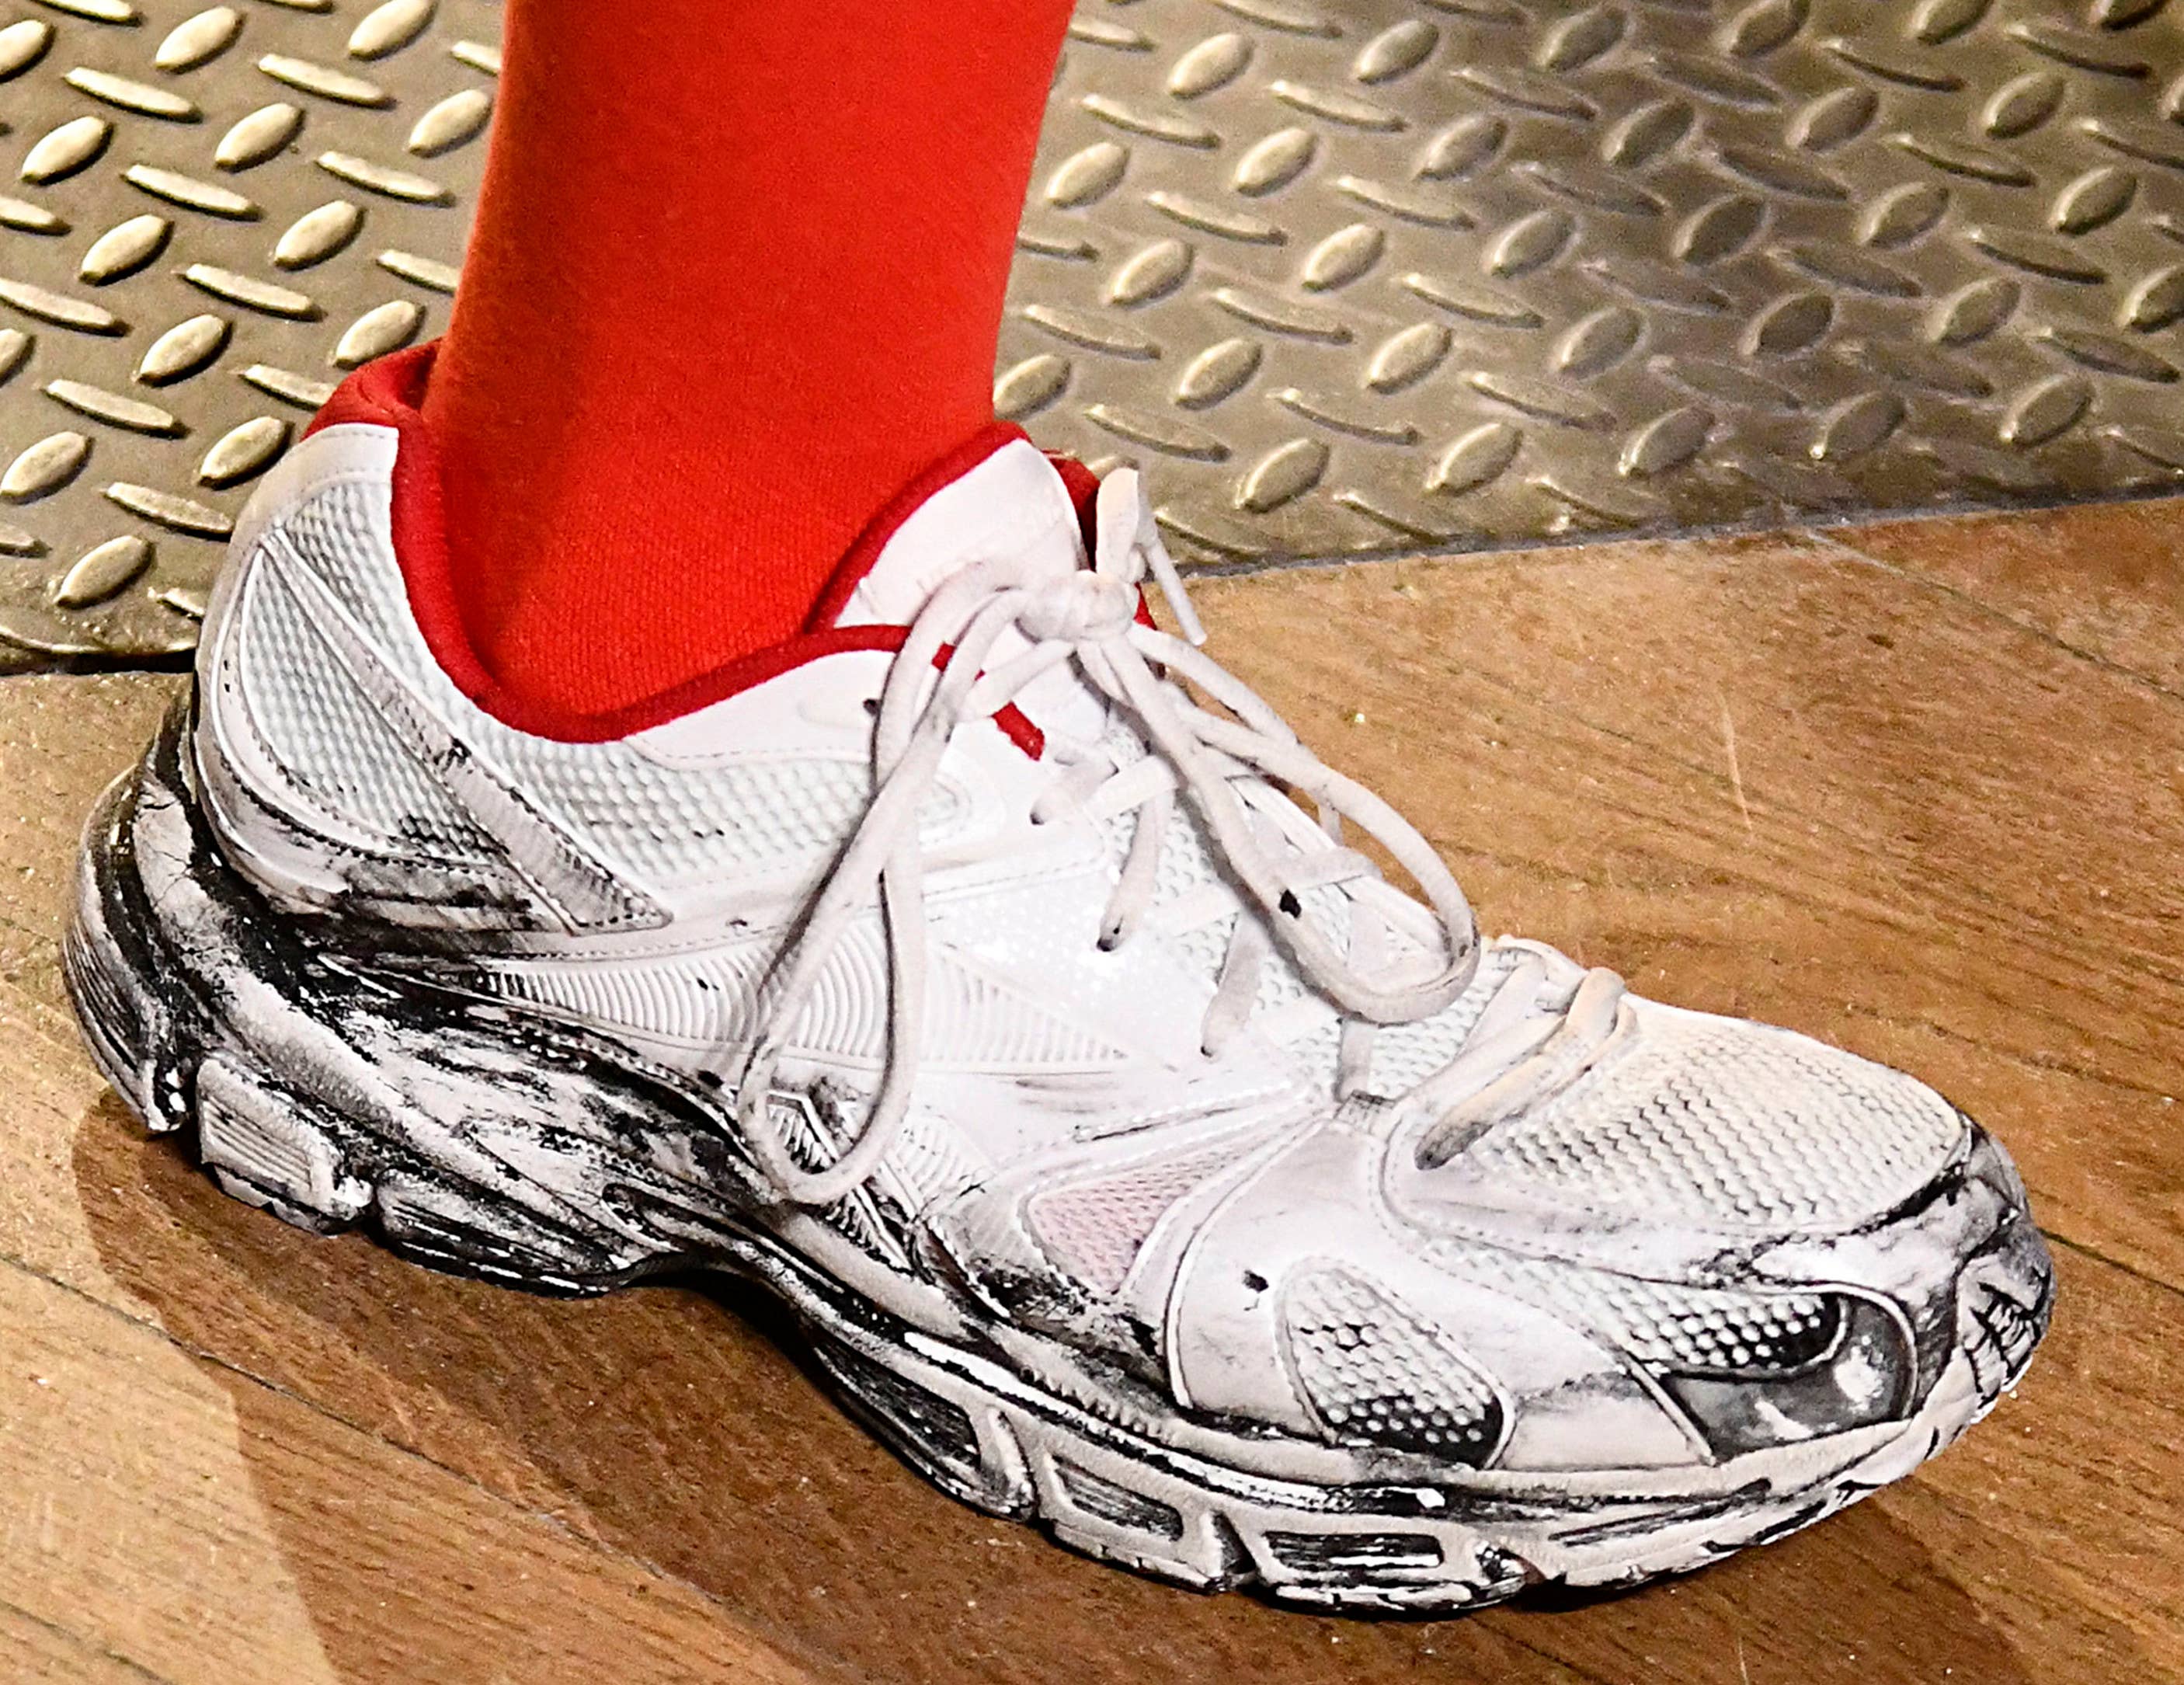 Reebok Is Releasing More Dirty Runners With Vetements | Complex